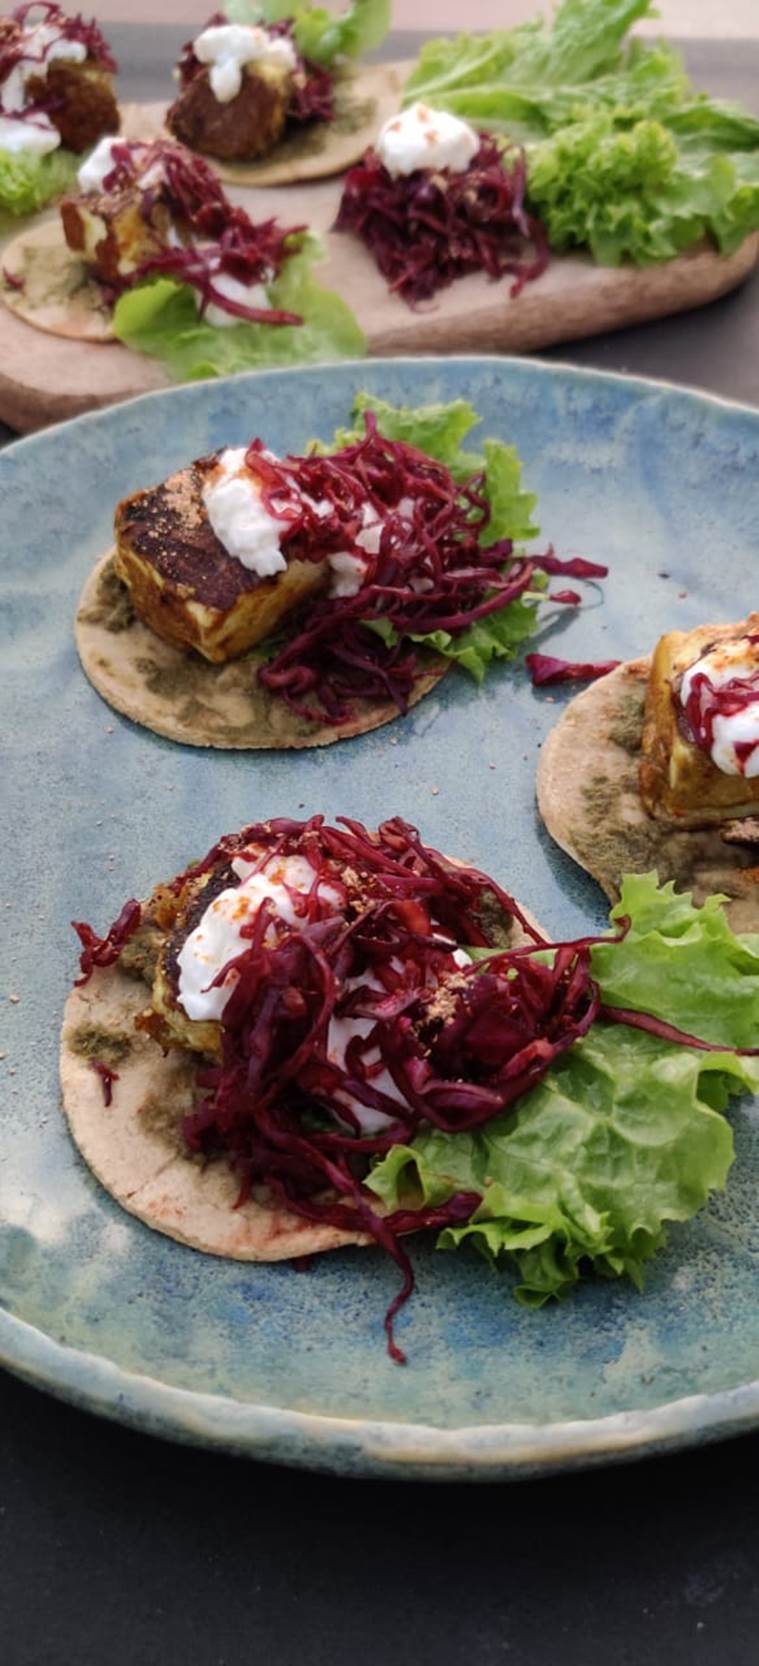 proso millet paneer tikka tacos, Sunday recipes, tasty food to eat on Sunday, millet recipes, easy recipes, tasty homemade food, healthy eating, indian express news